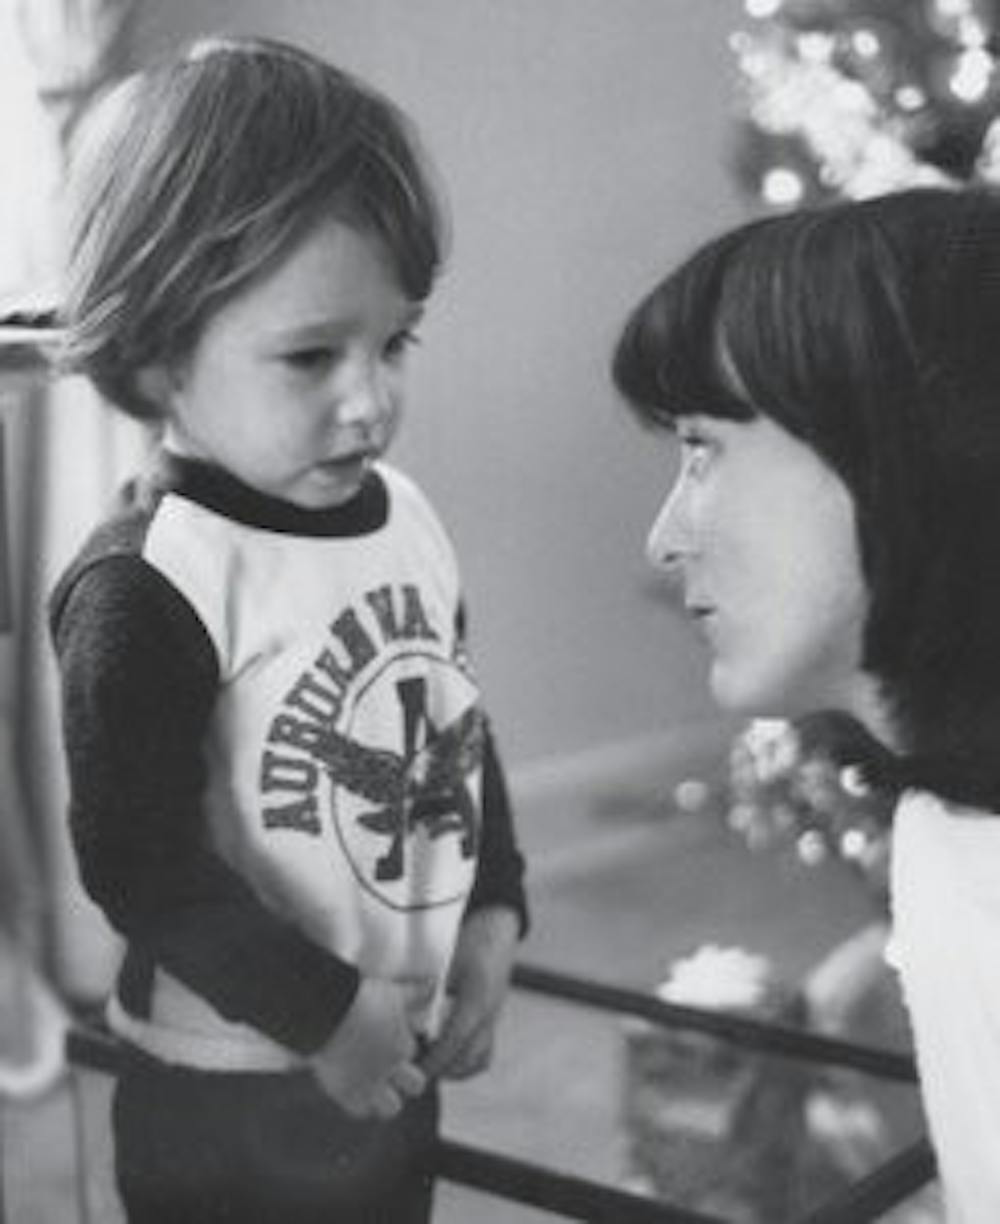 "She never let me get away with anything, even at age three," Seth said. A young Seth and his mother celebrate Christmas 1980. (Courtesy of Seth Griffin)